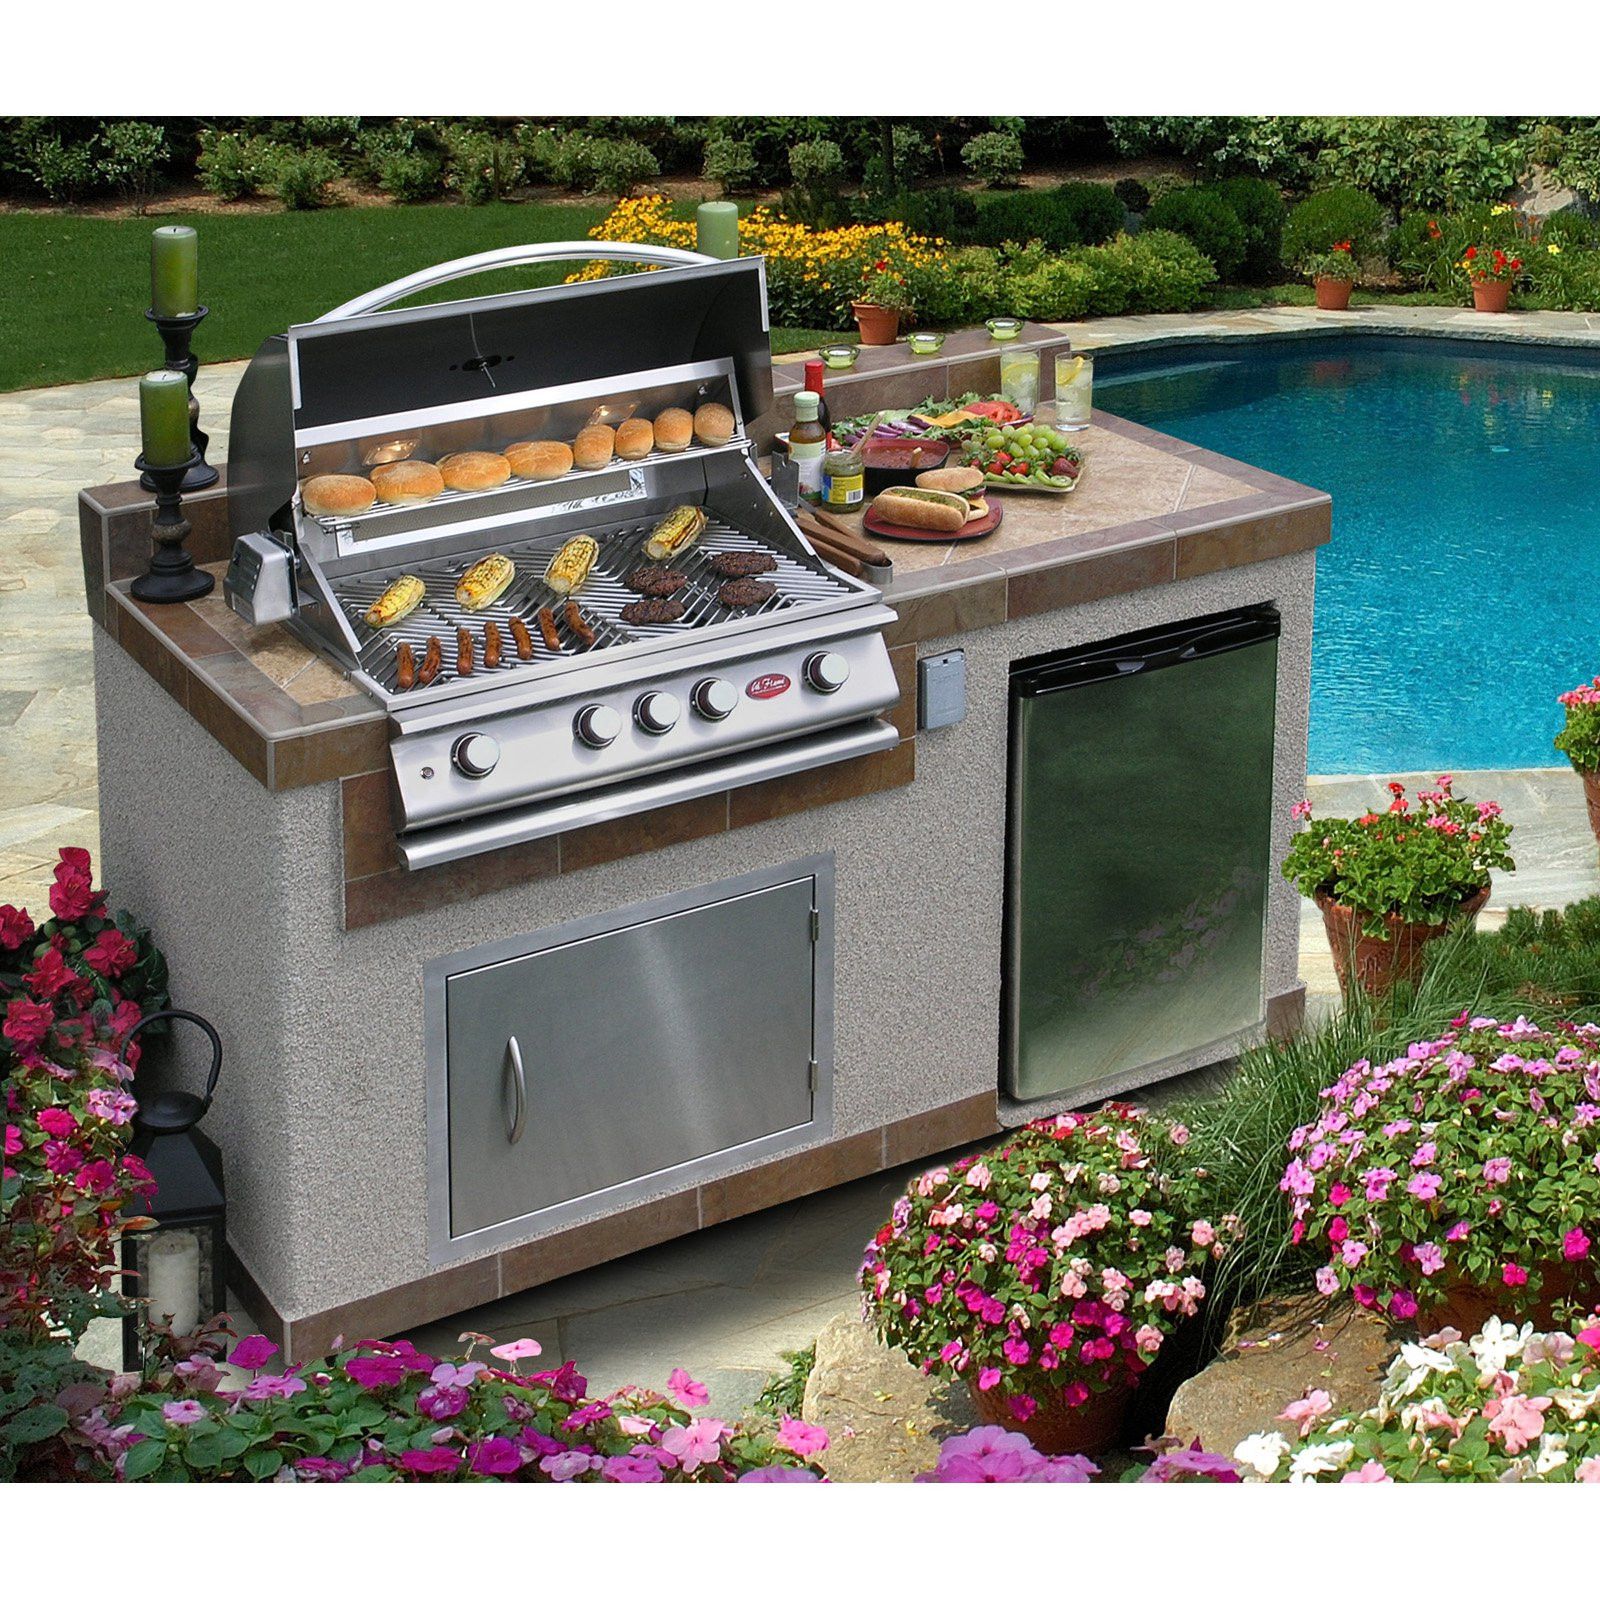 Outdoor Kitchen Refrigerator
 Cal Flame Outdoor Kitchen 4 Burner Barbecue Grill Island